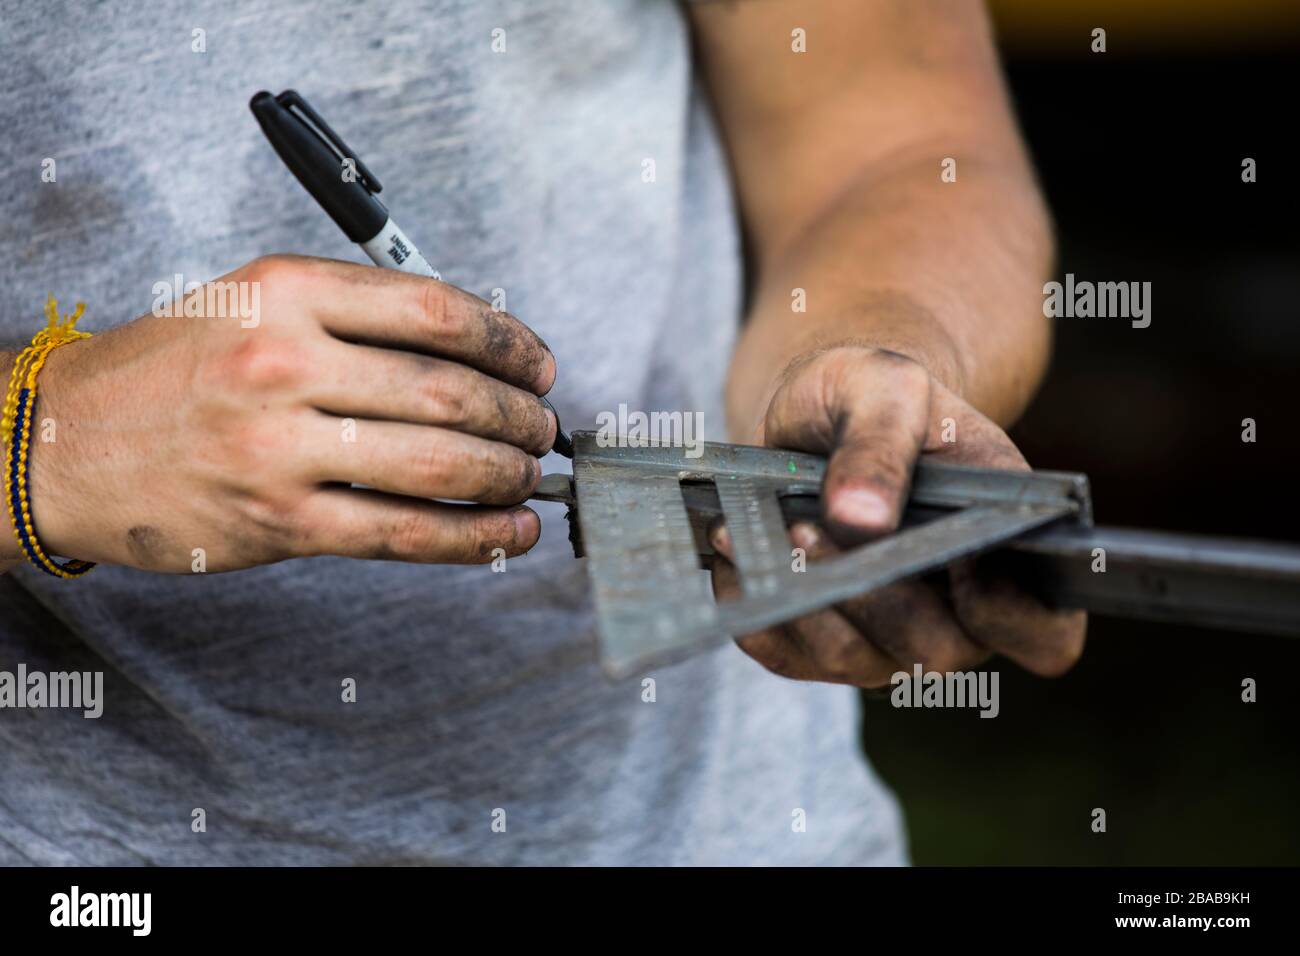 Construction worker using speed square to measure angle on steel. Stock Photo